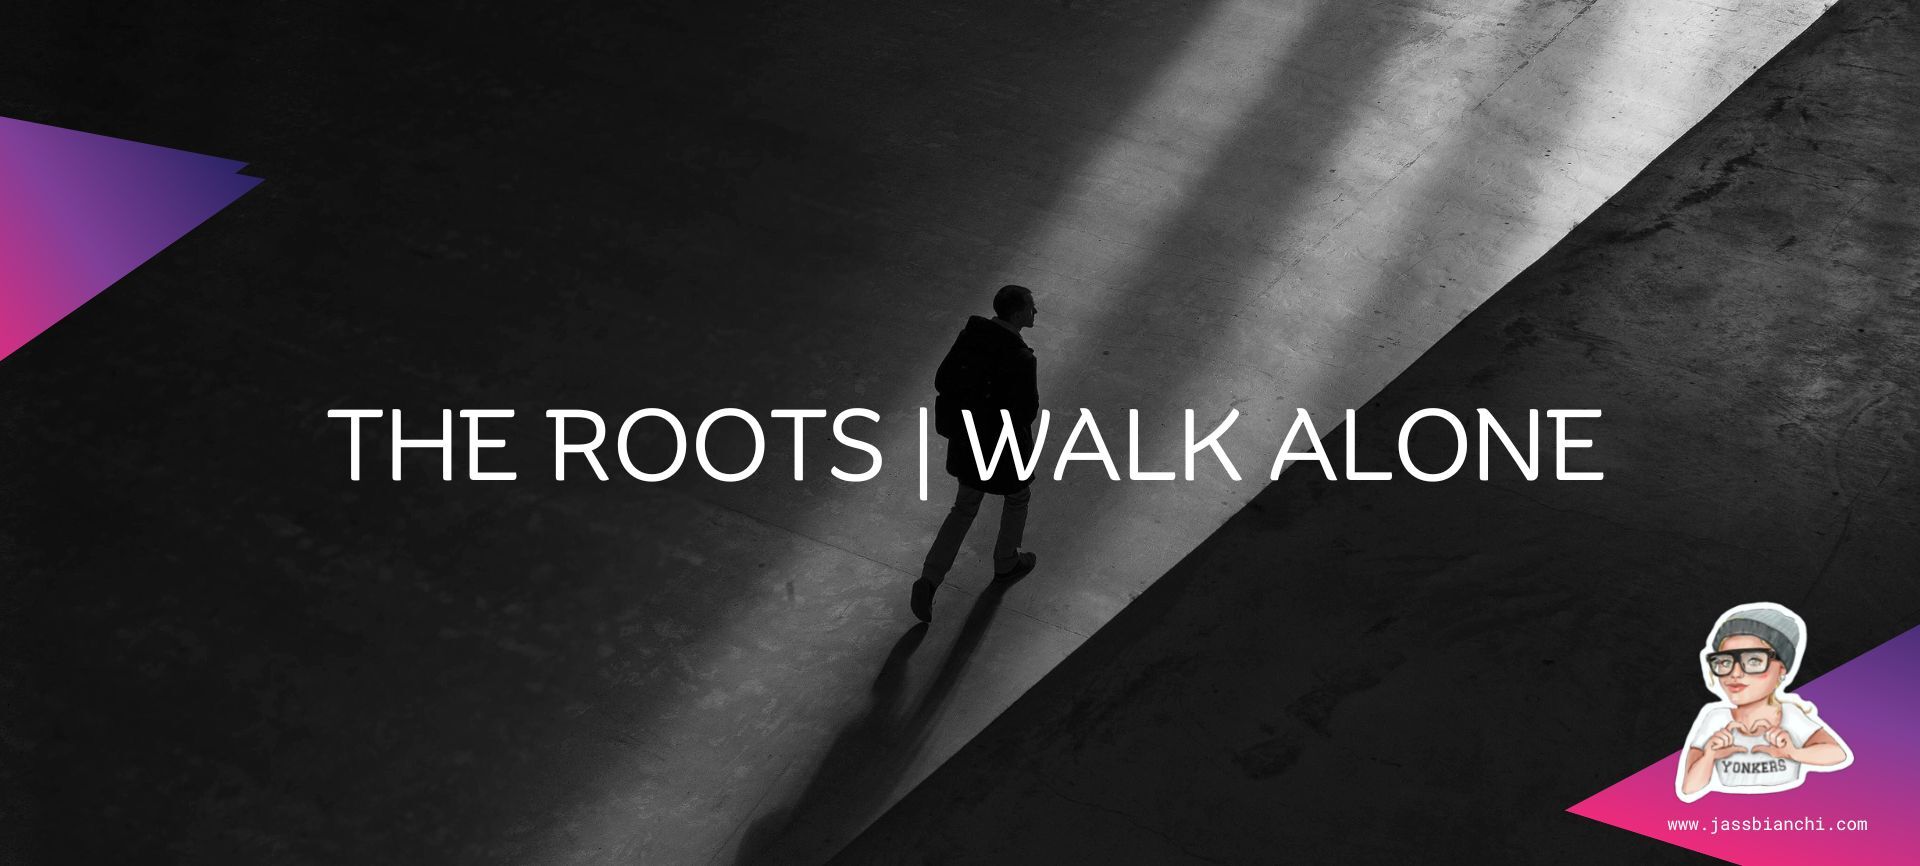 "Why Walk Alone by The Roots is the Perfect Song for Introverts"